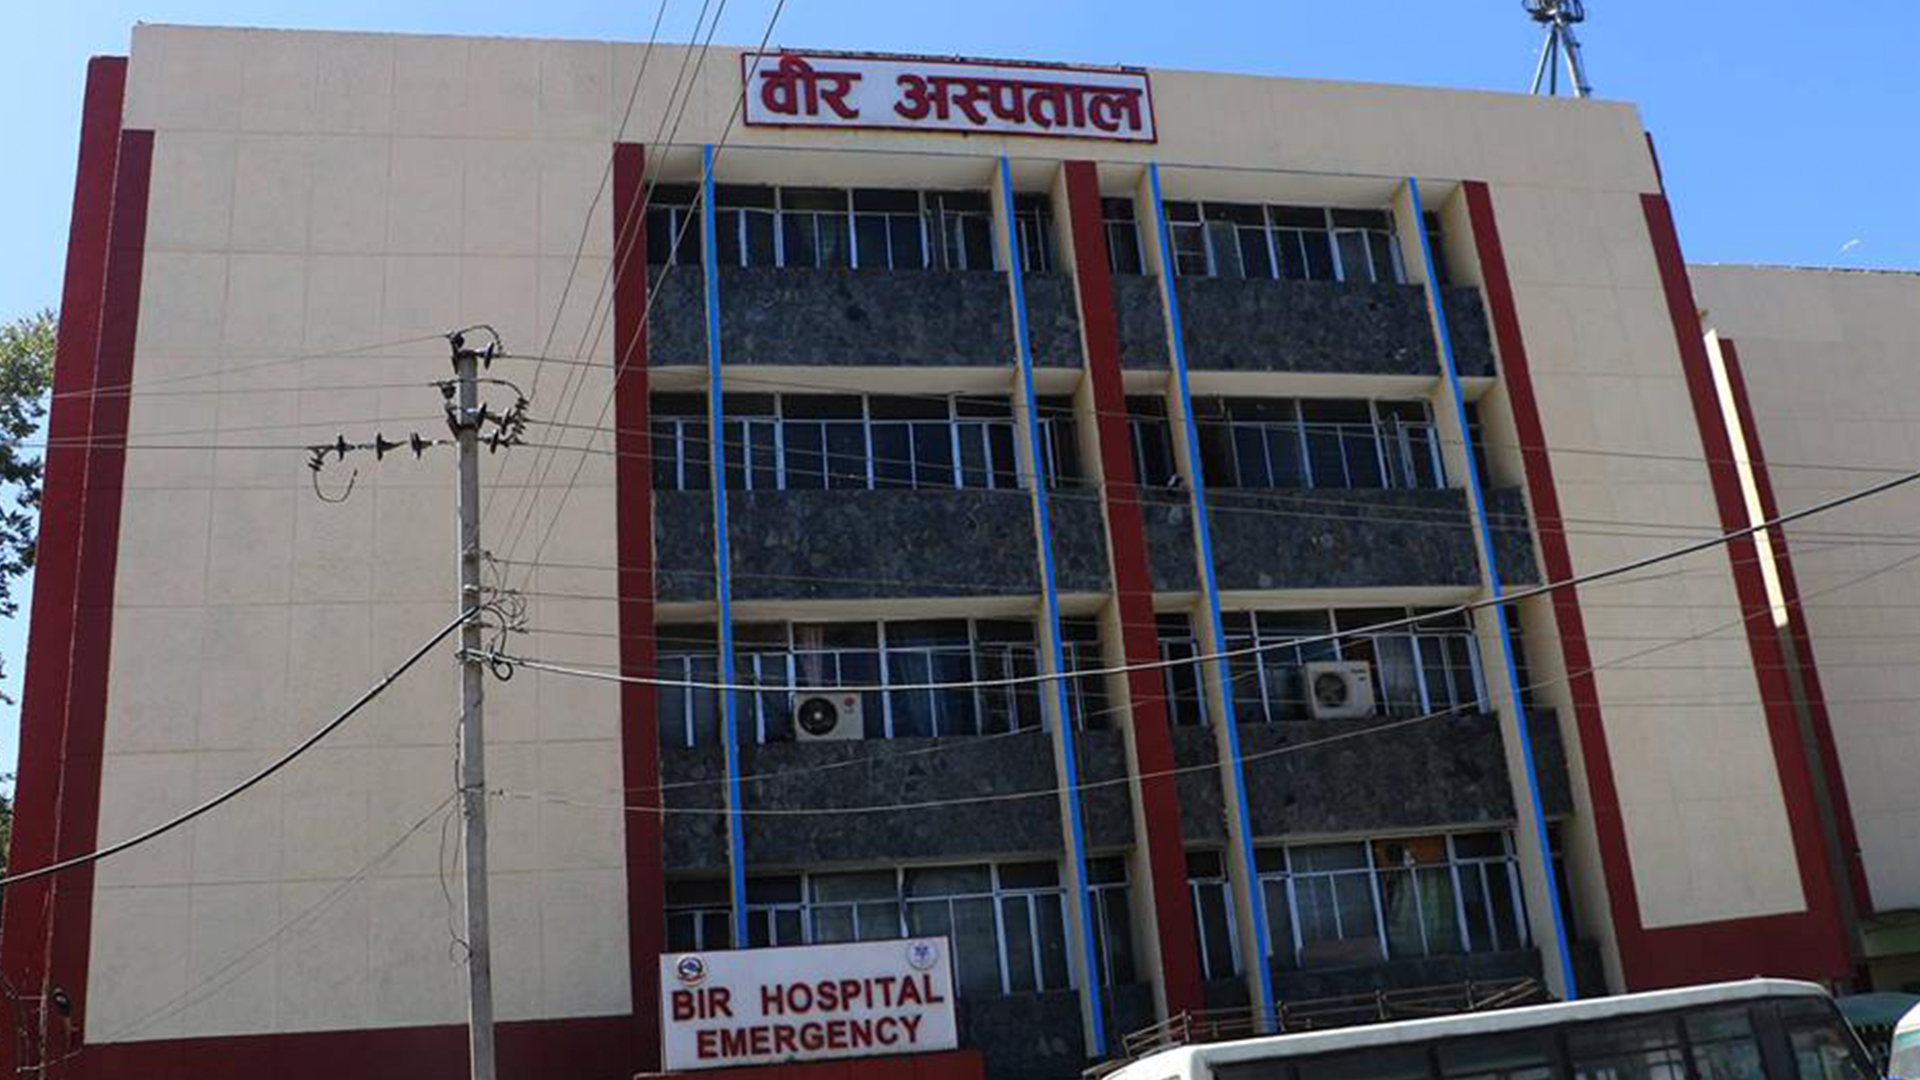 OPD Services stopped at Bir Hospital after 71 Employees Test Positive for Covid-19